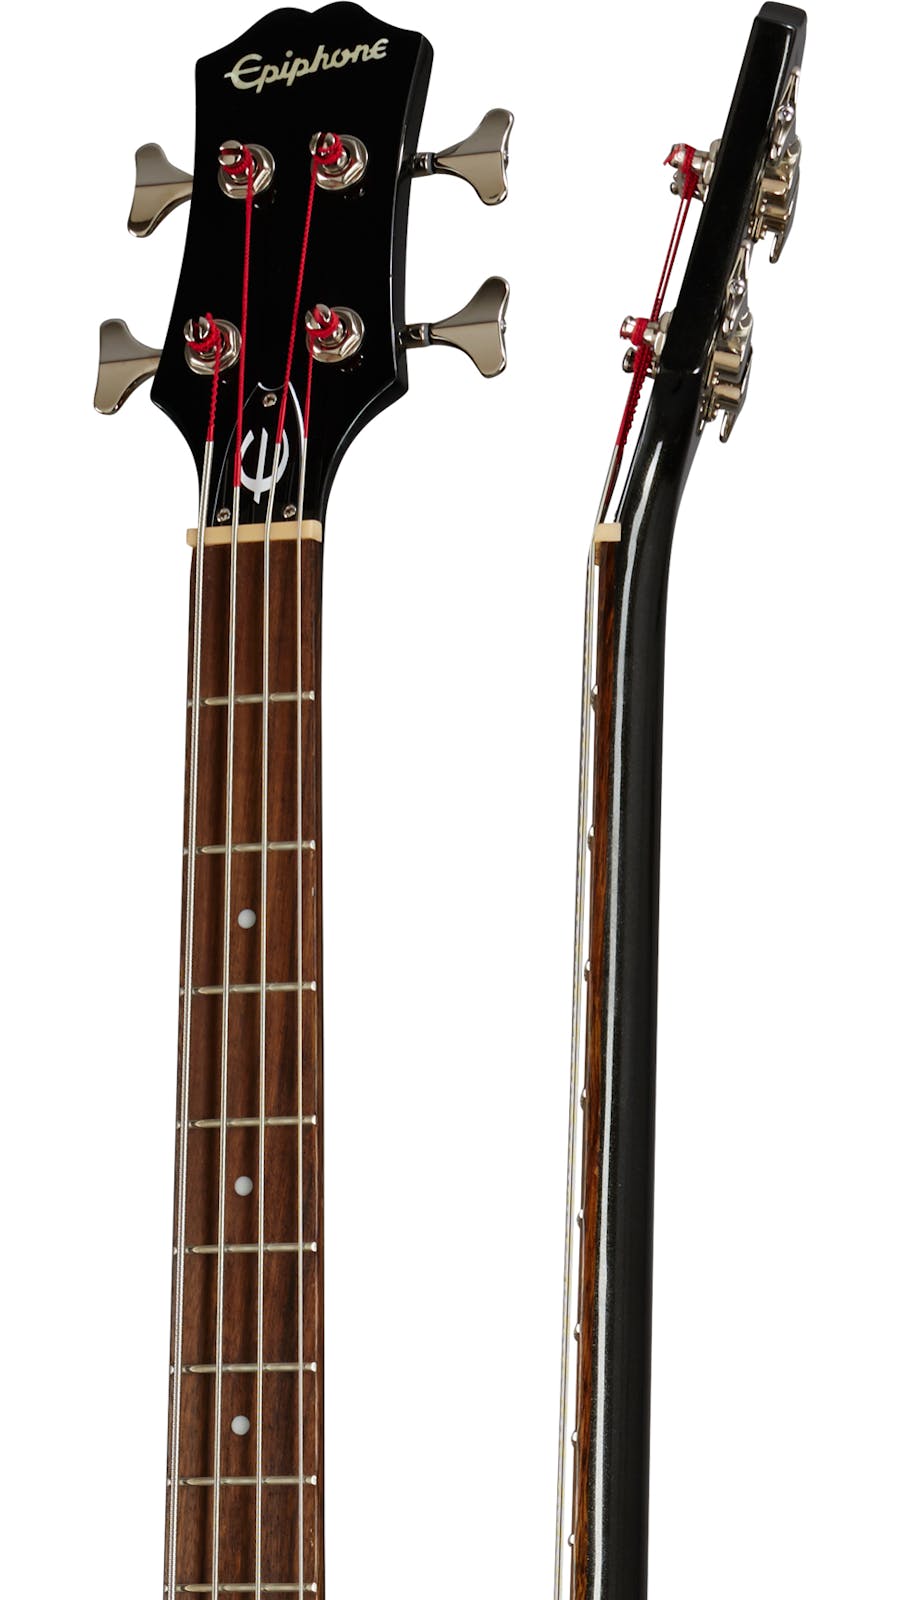 Epiphone Embassy Bass in Graphite Black - Andertons Music Co.